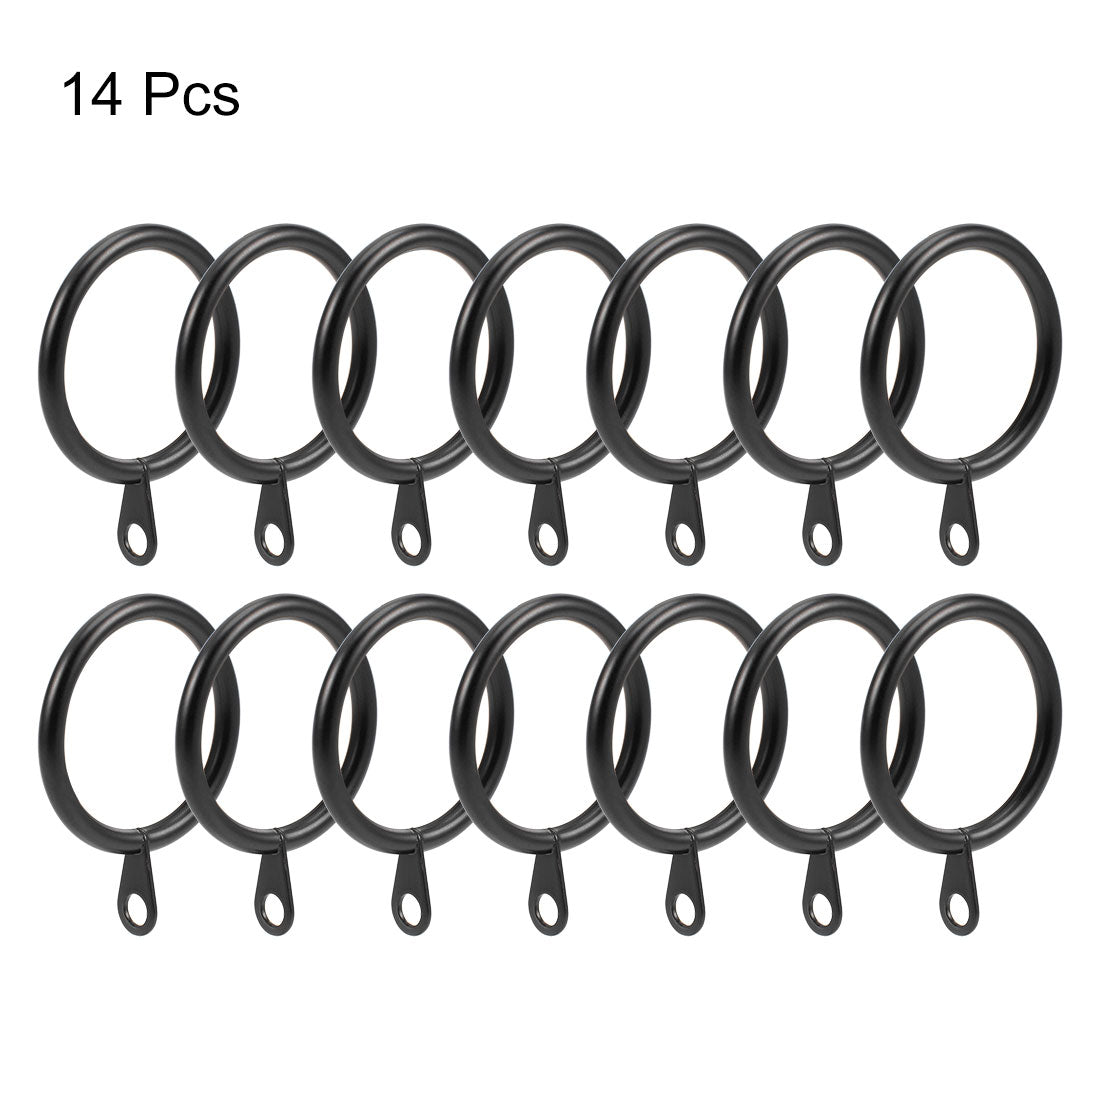 uxcell Uxcell Curtain Rings Metal 32mm Inner Dia Drapery Ring for Curtain Rods Black 14 Pcs